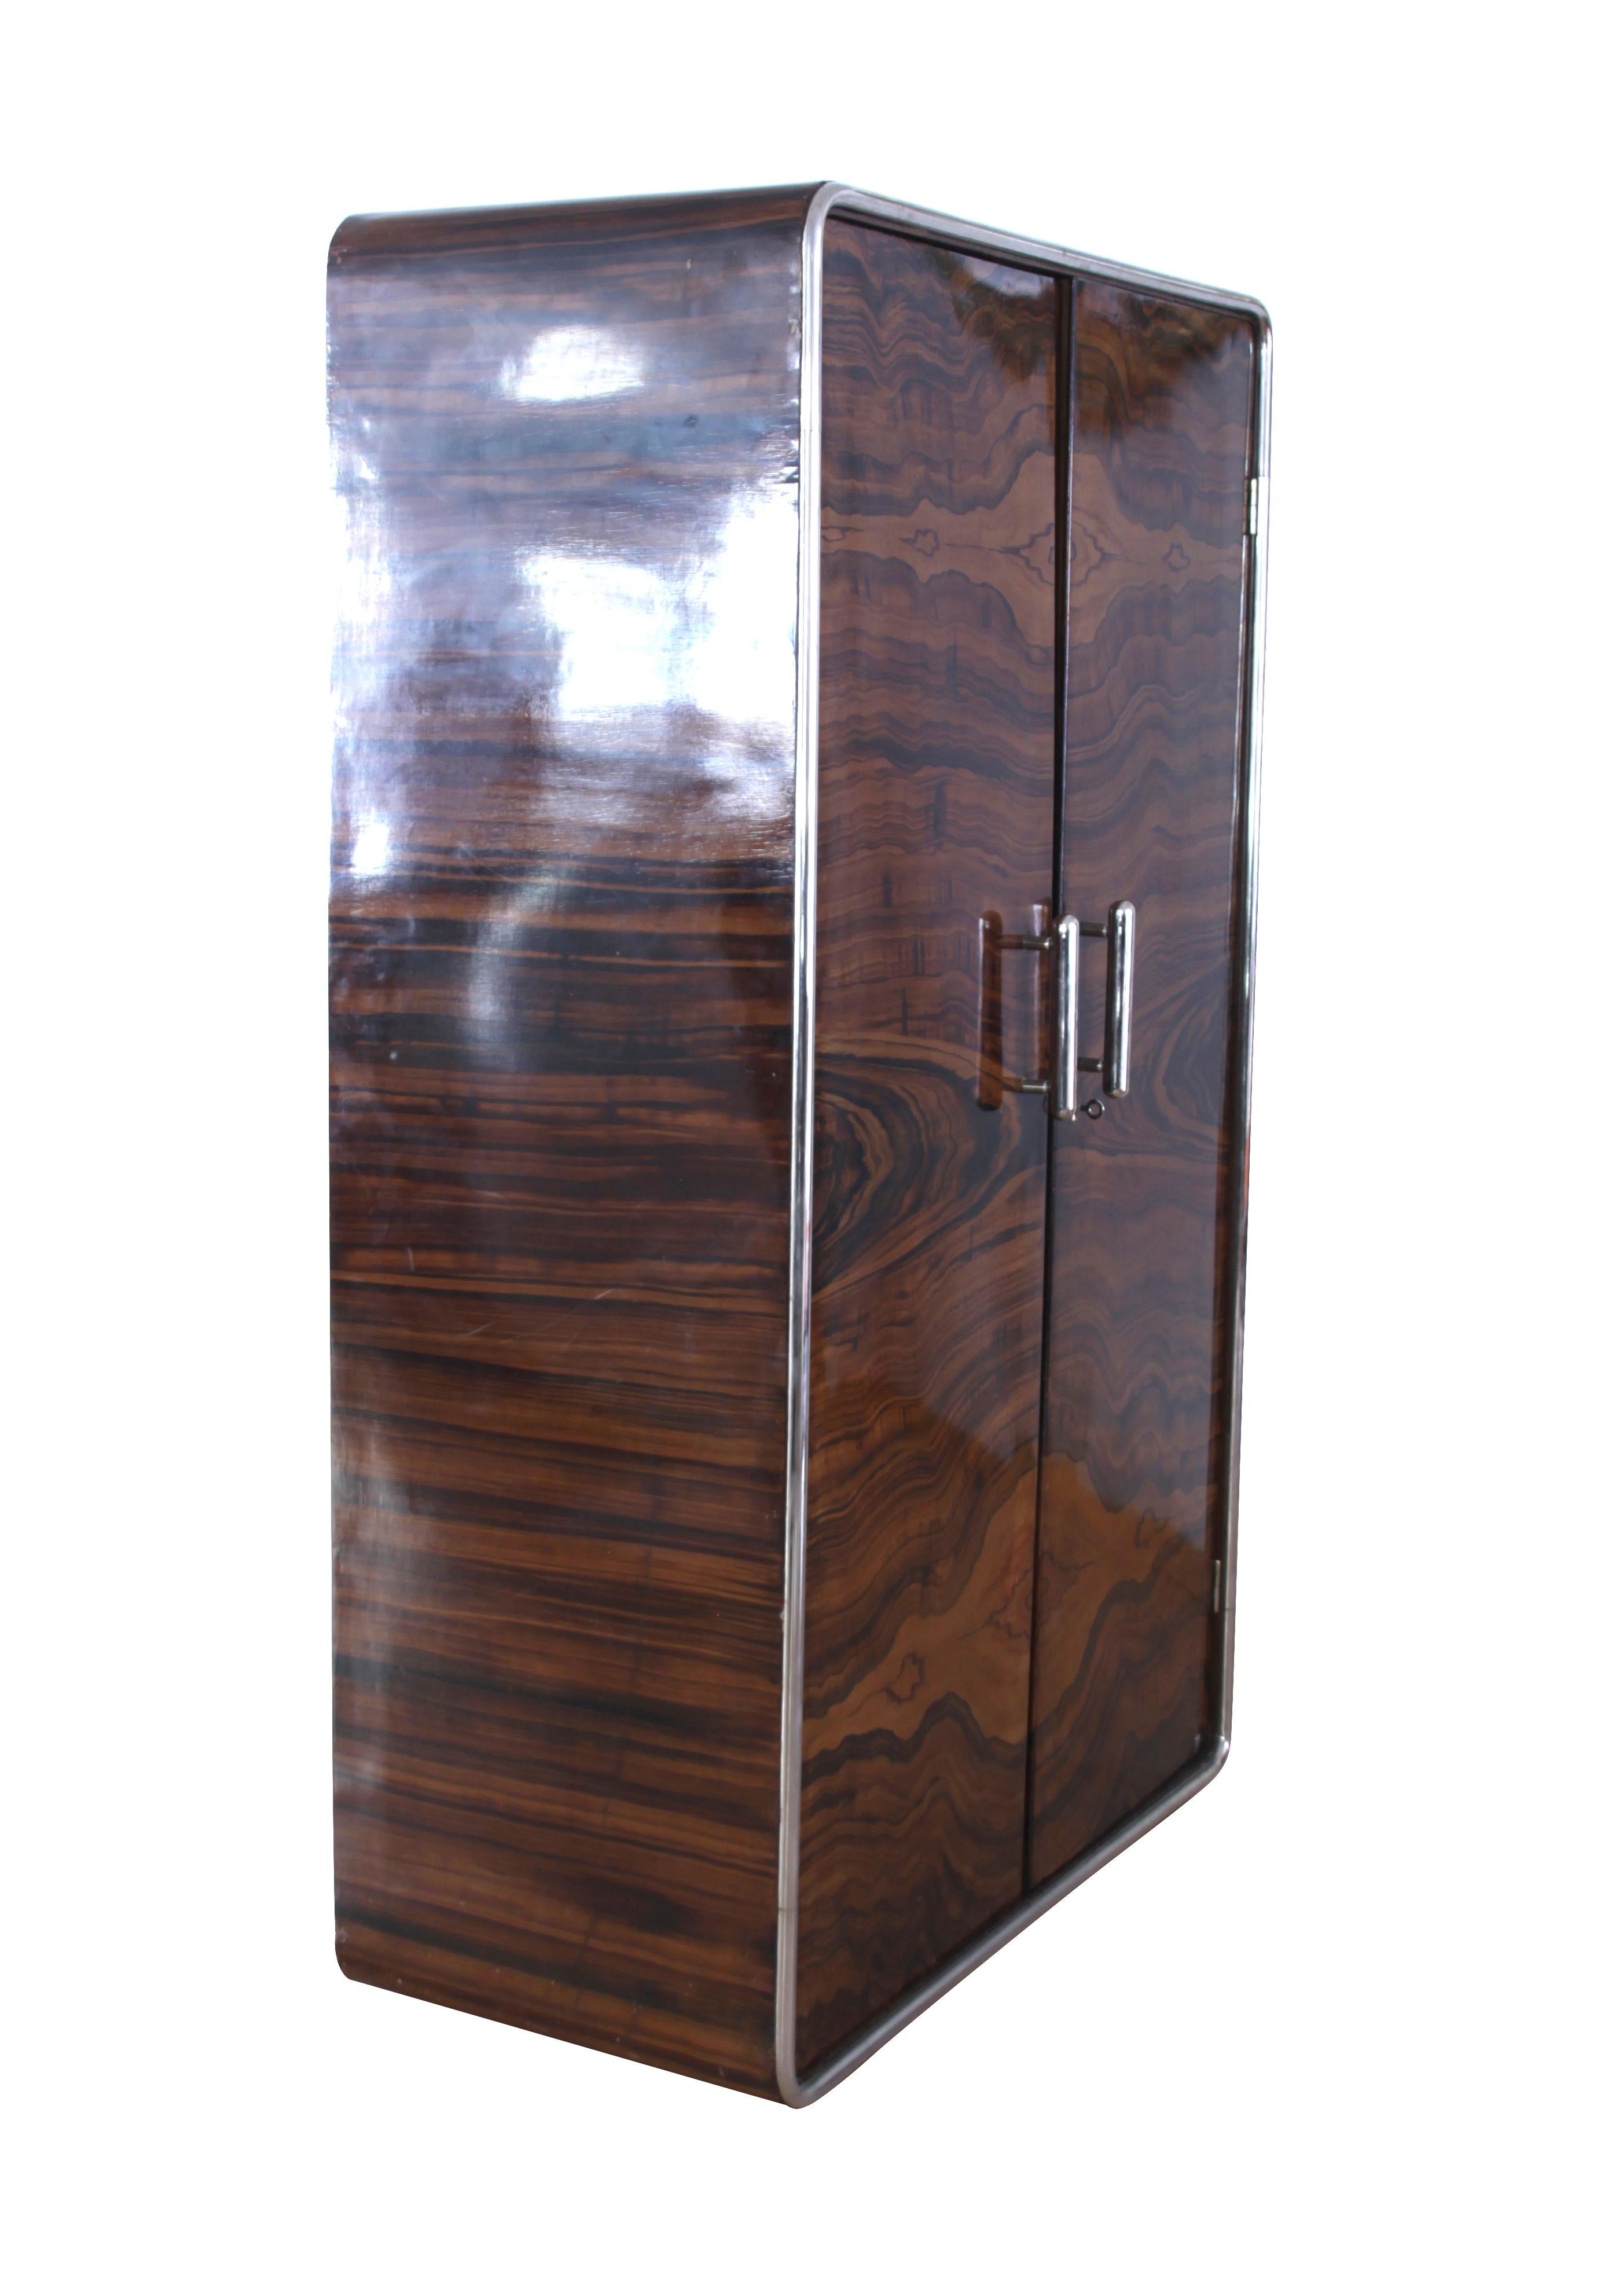 Elegant and unusual two-doored Art Deco Armoire from Czechia, circa 1930.

The wood is plywood (beech) painted in a wonderful bookmatched Palisander veneer optic, a quite rare technique from this period.

Around the whole edge of the trunk, there is